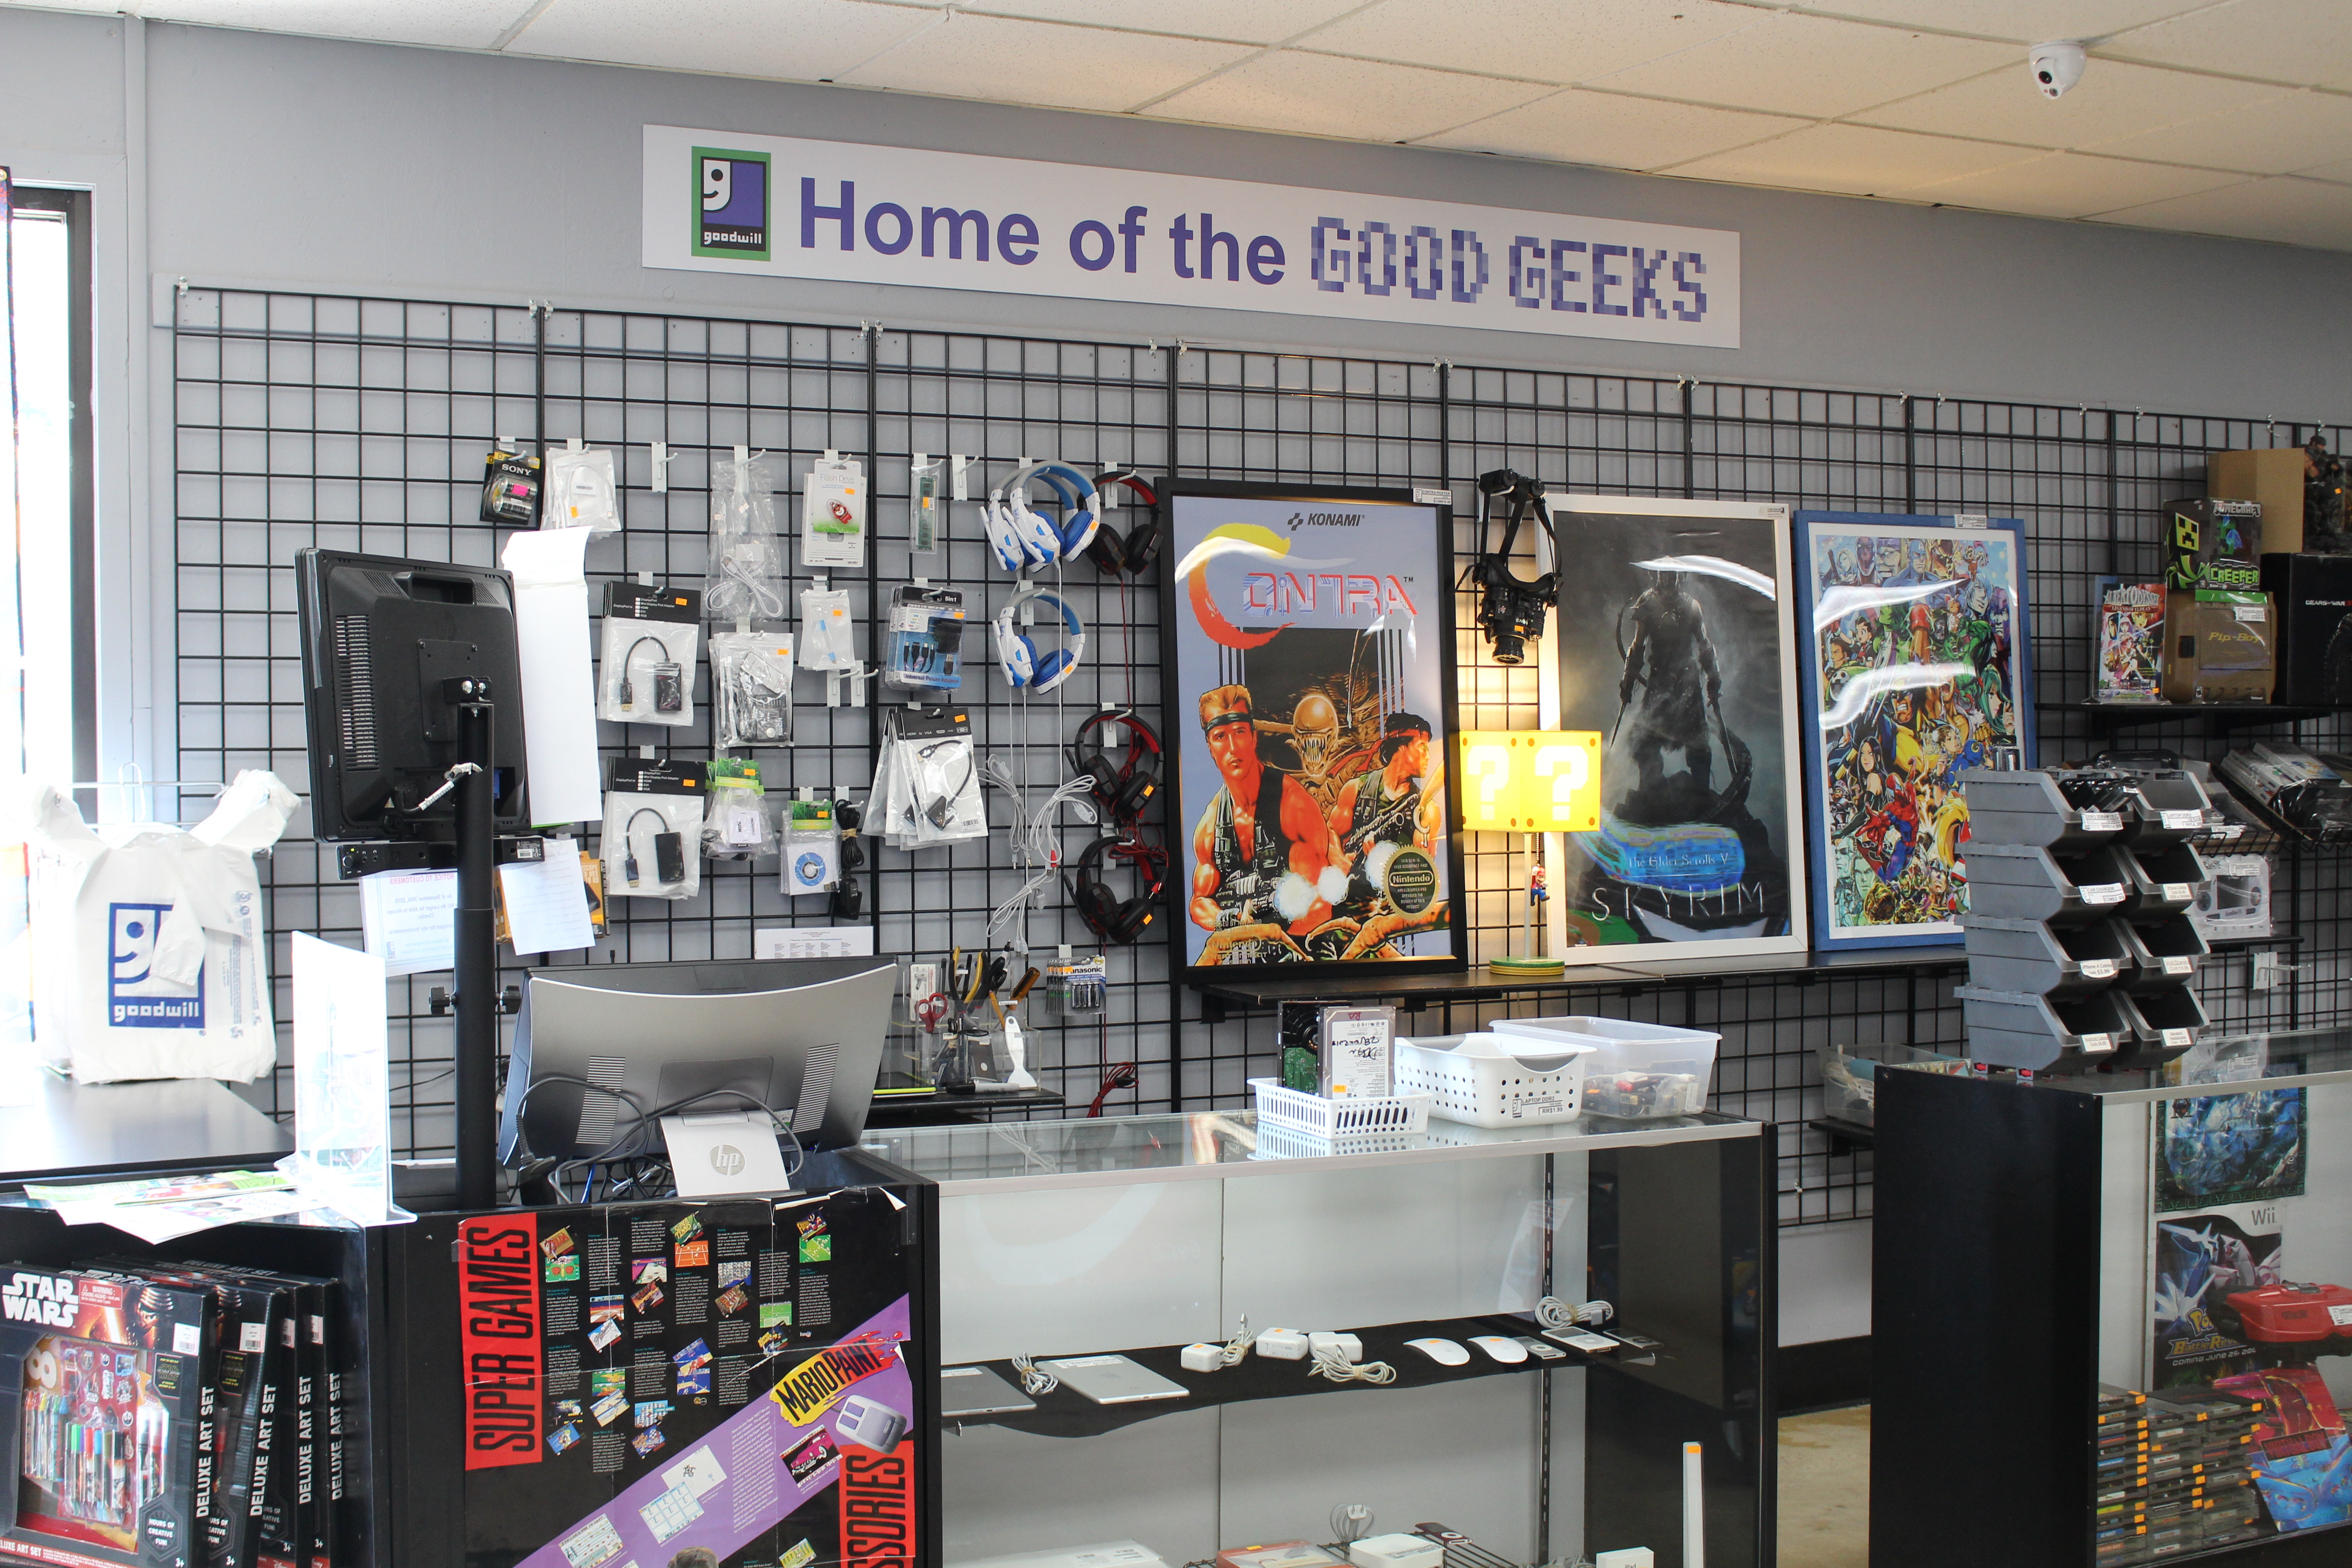 Goodwill Computer Store | We're The Good Geeks - Goodwill Industries